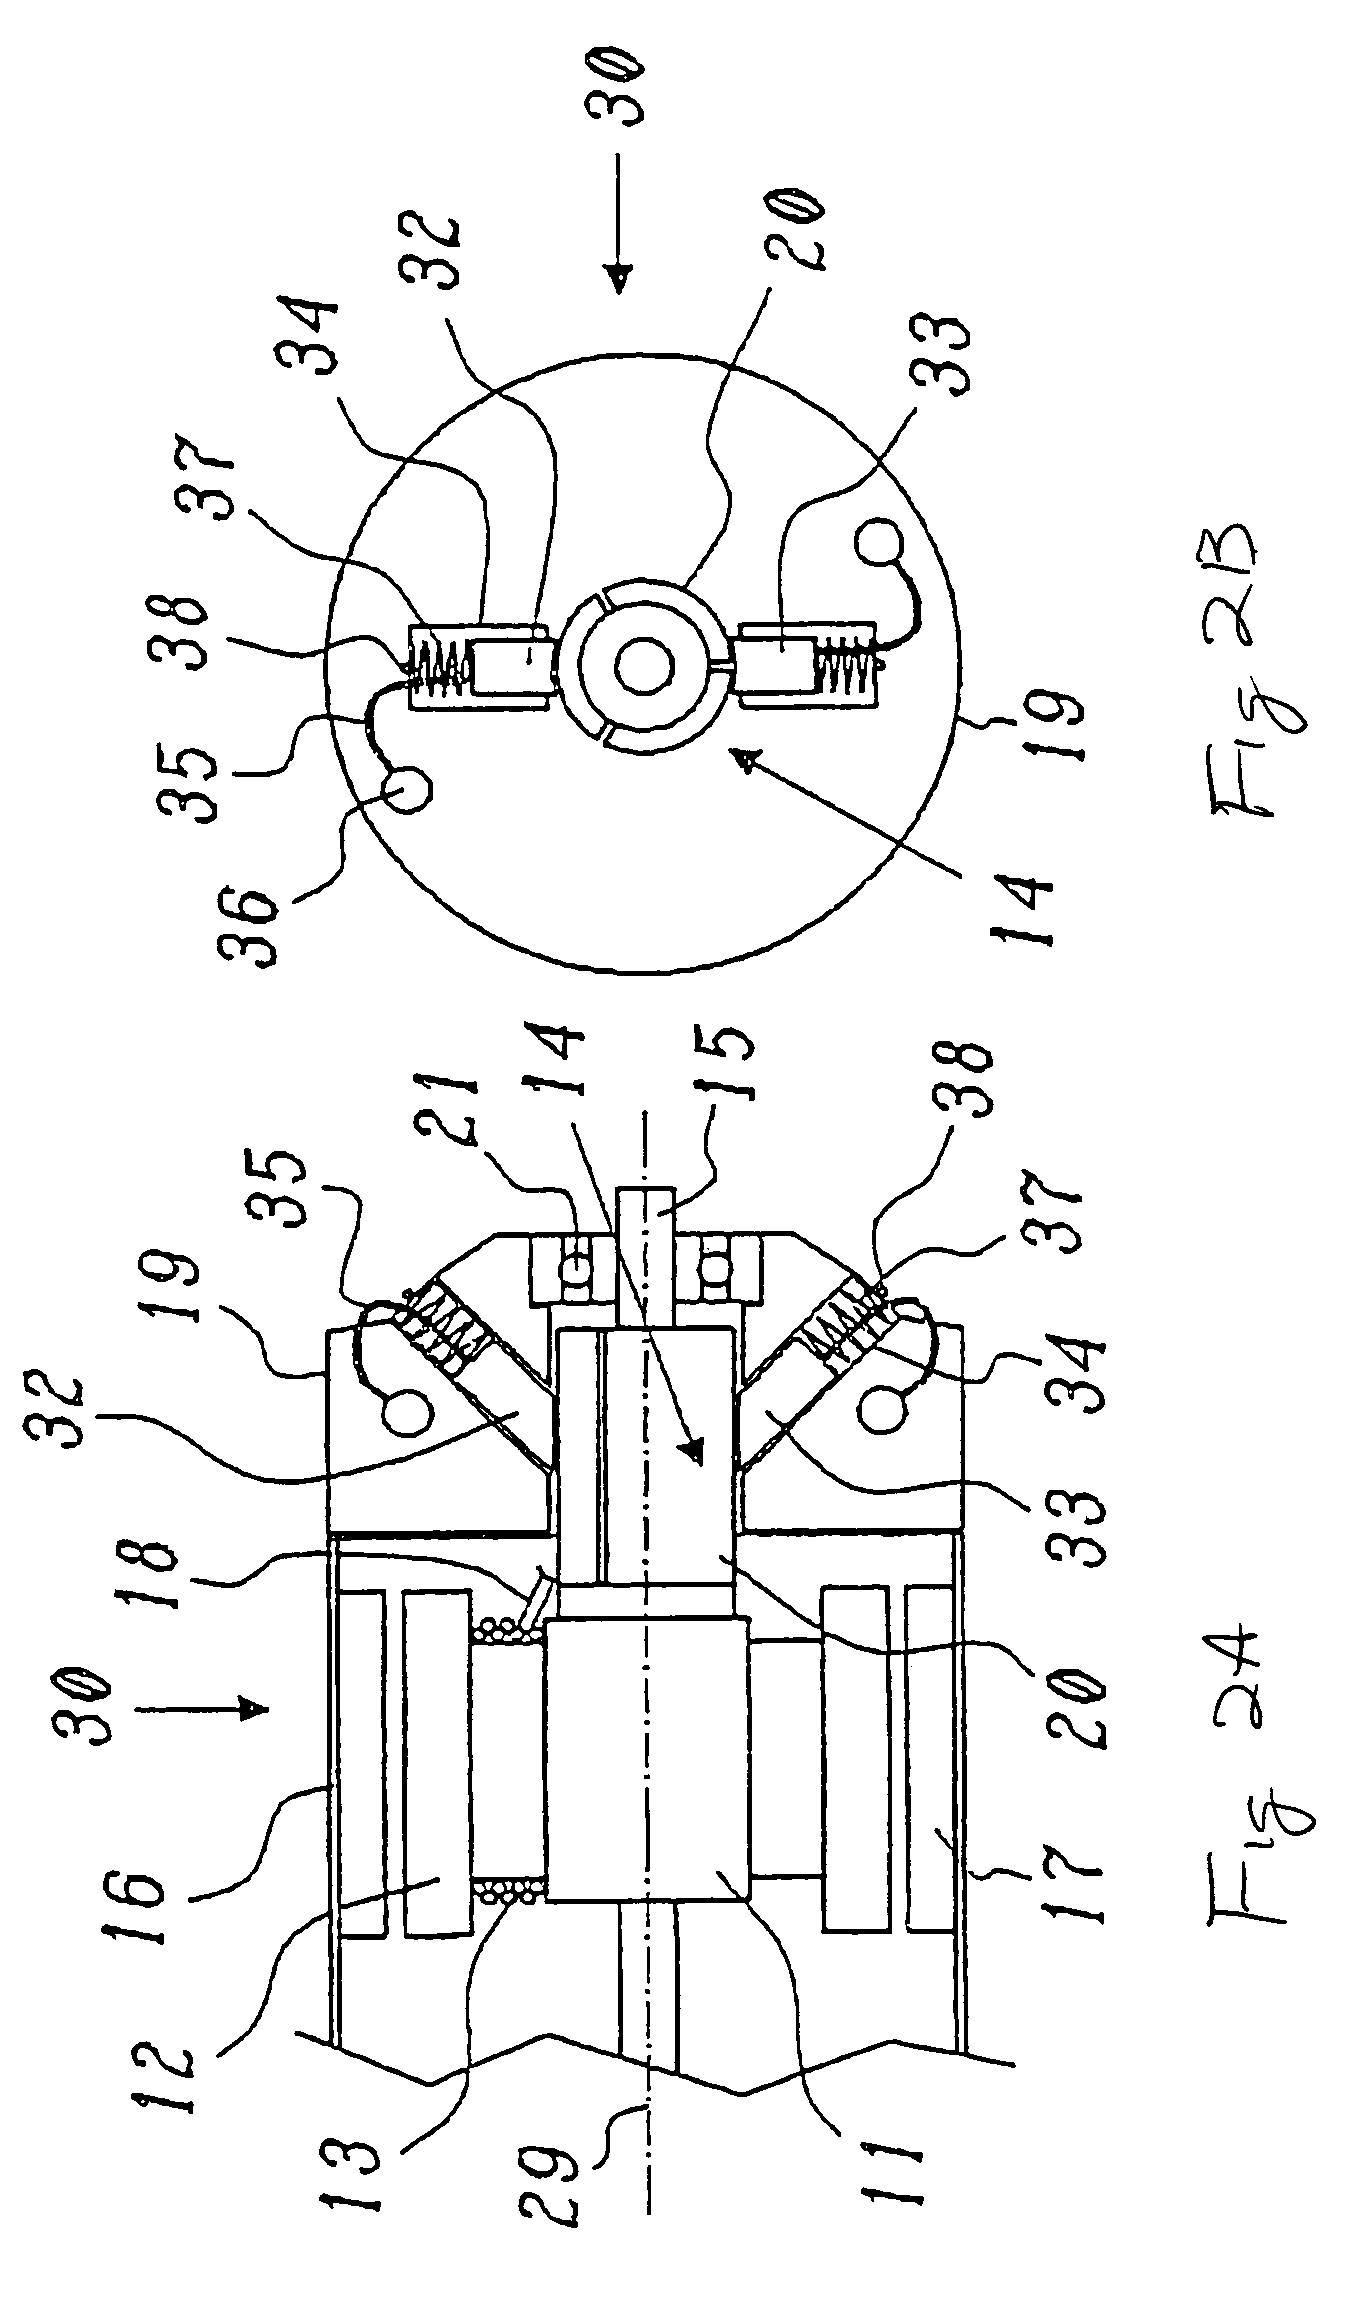 High-power direct current engine comprising a collector and carbon brushes for a racing car serving as prototype